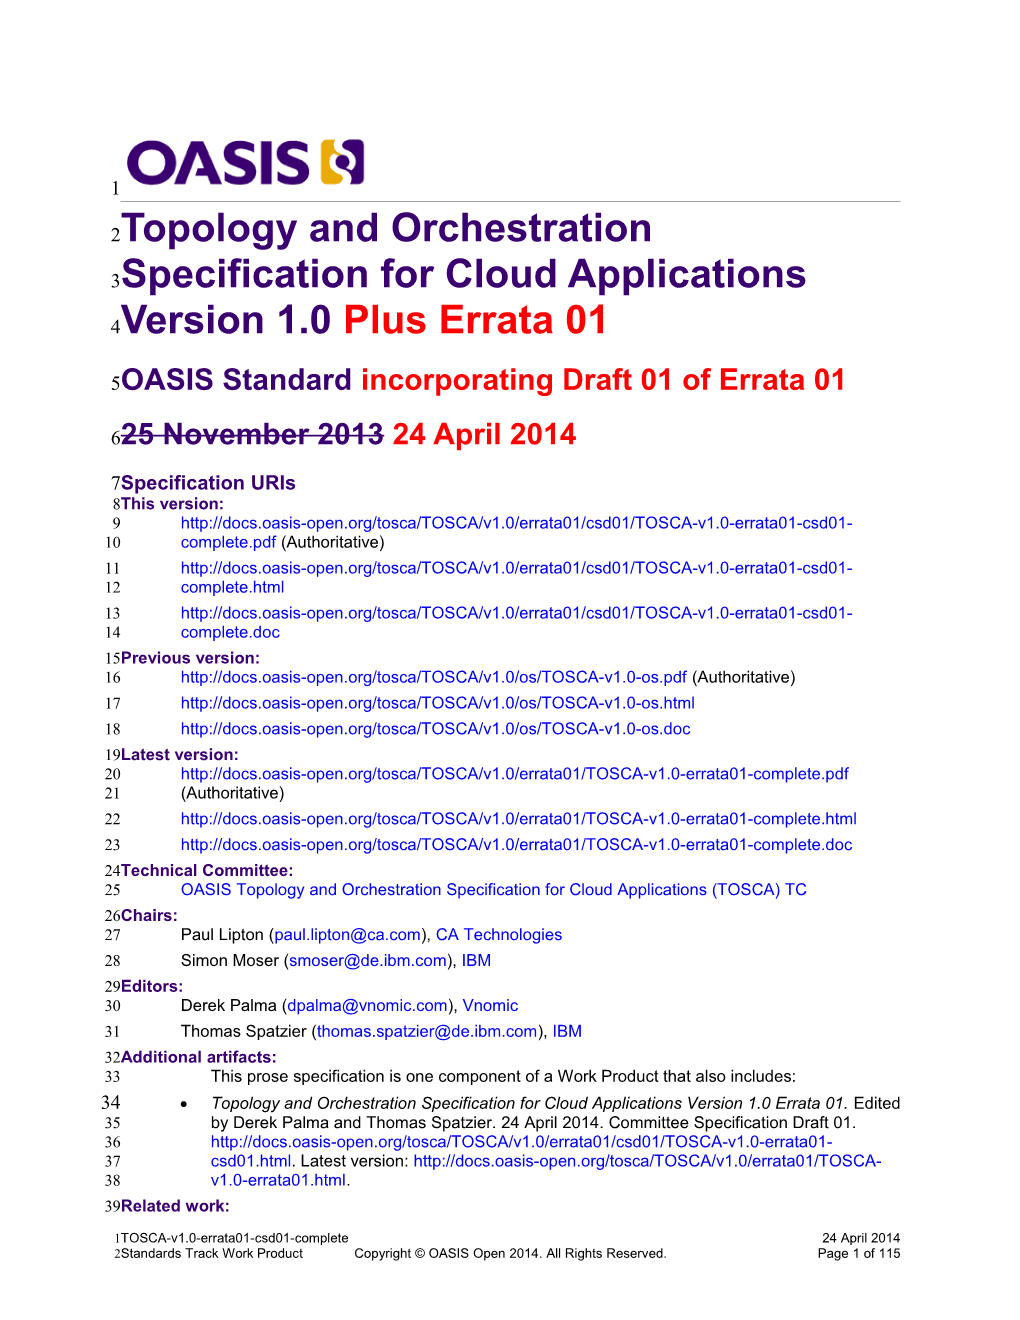 Topology and Orchestration Specification for Cloud Applications Version 1.0 Plus Errata 01